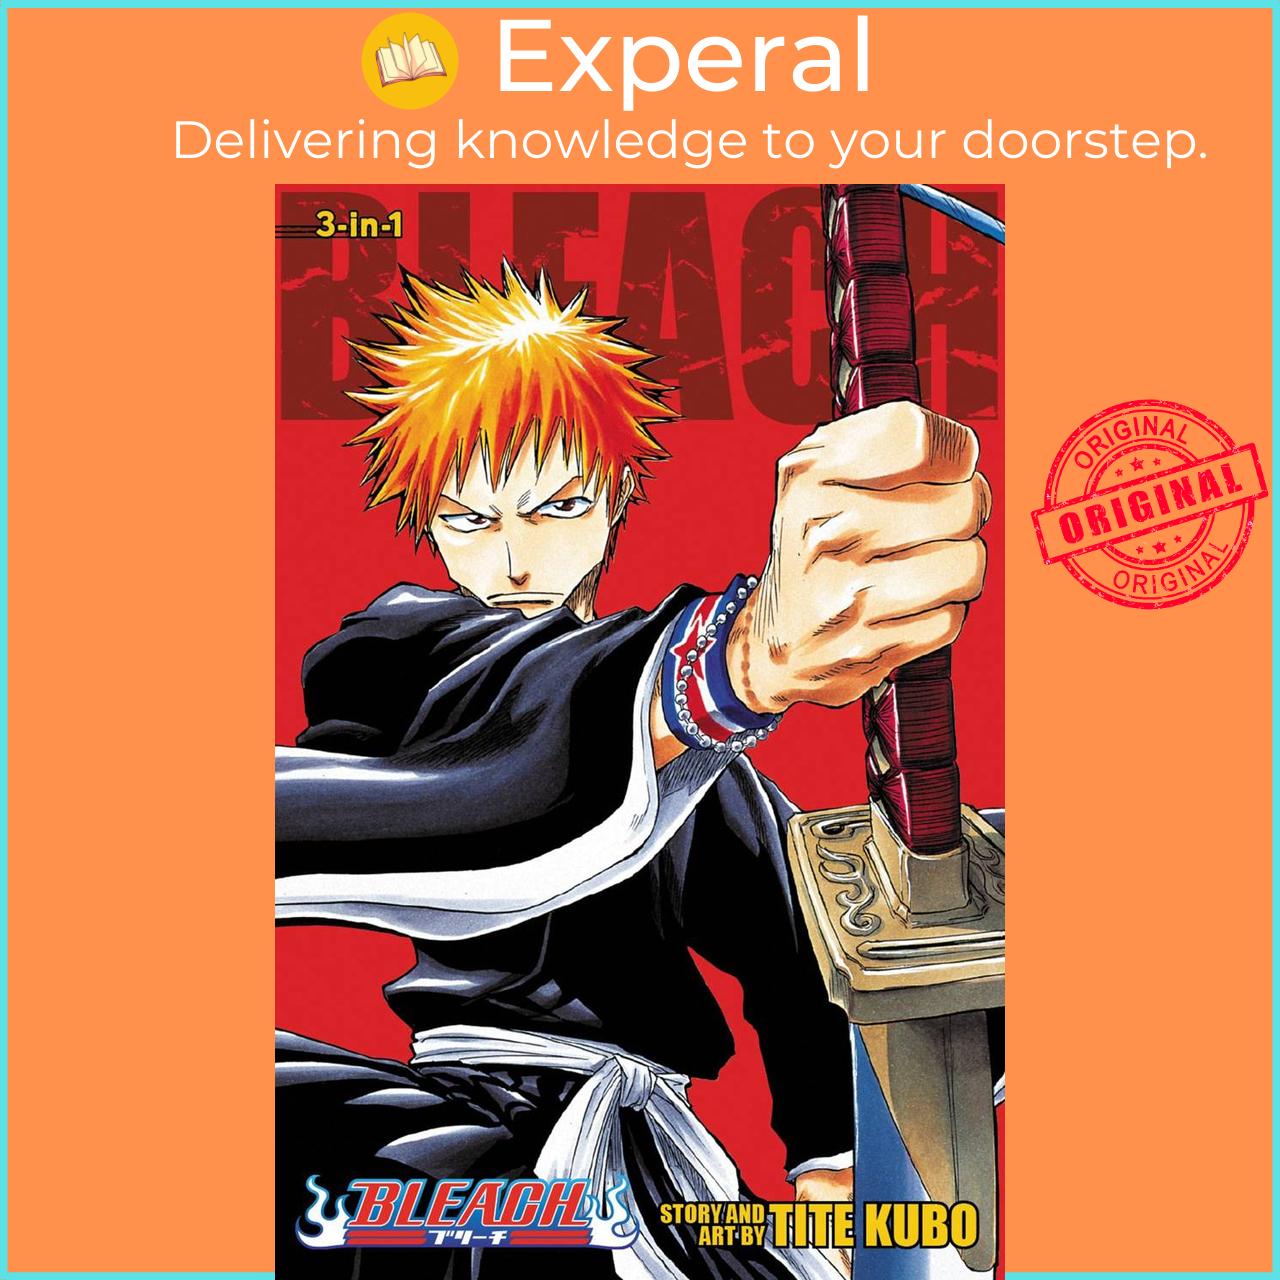 Sách - Bleach (3-in-1 Edition), Vol. 1 - Includes vols. 1, 2 & 3 by Tite Kubo (US edition, paperback)